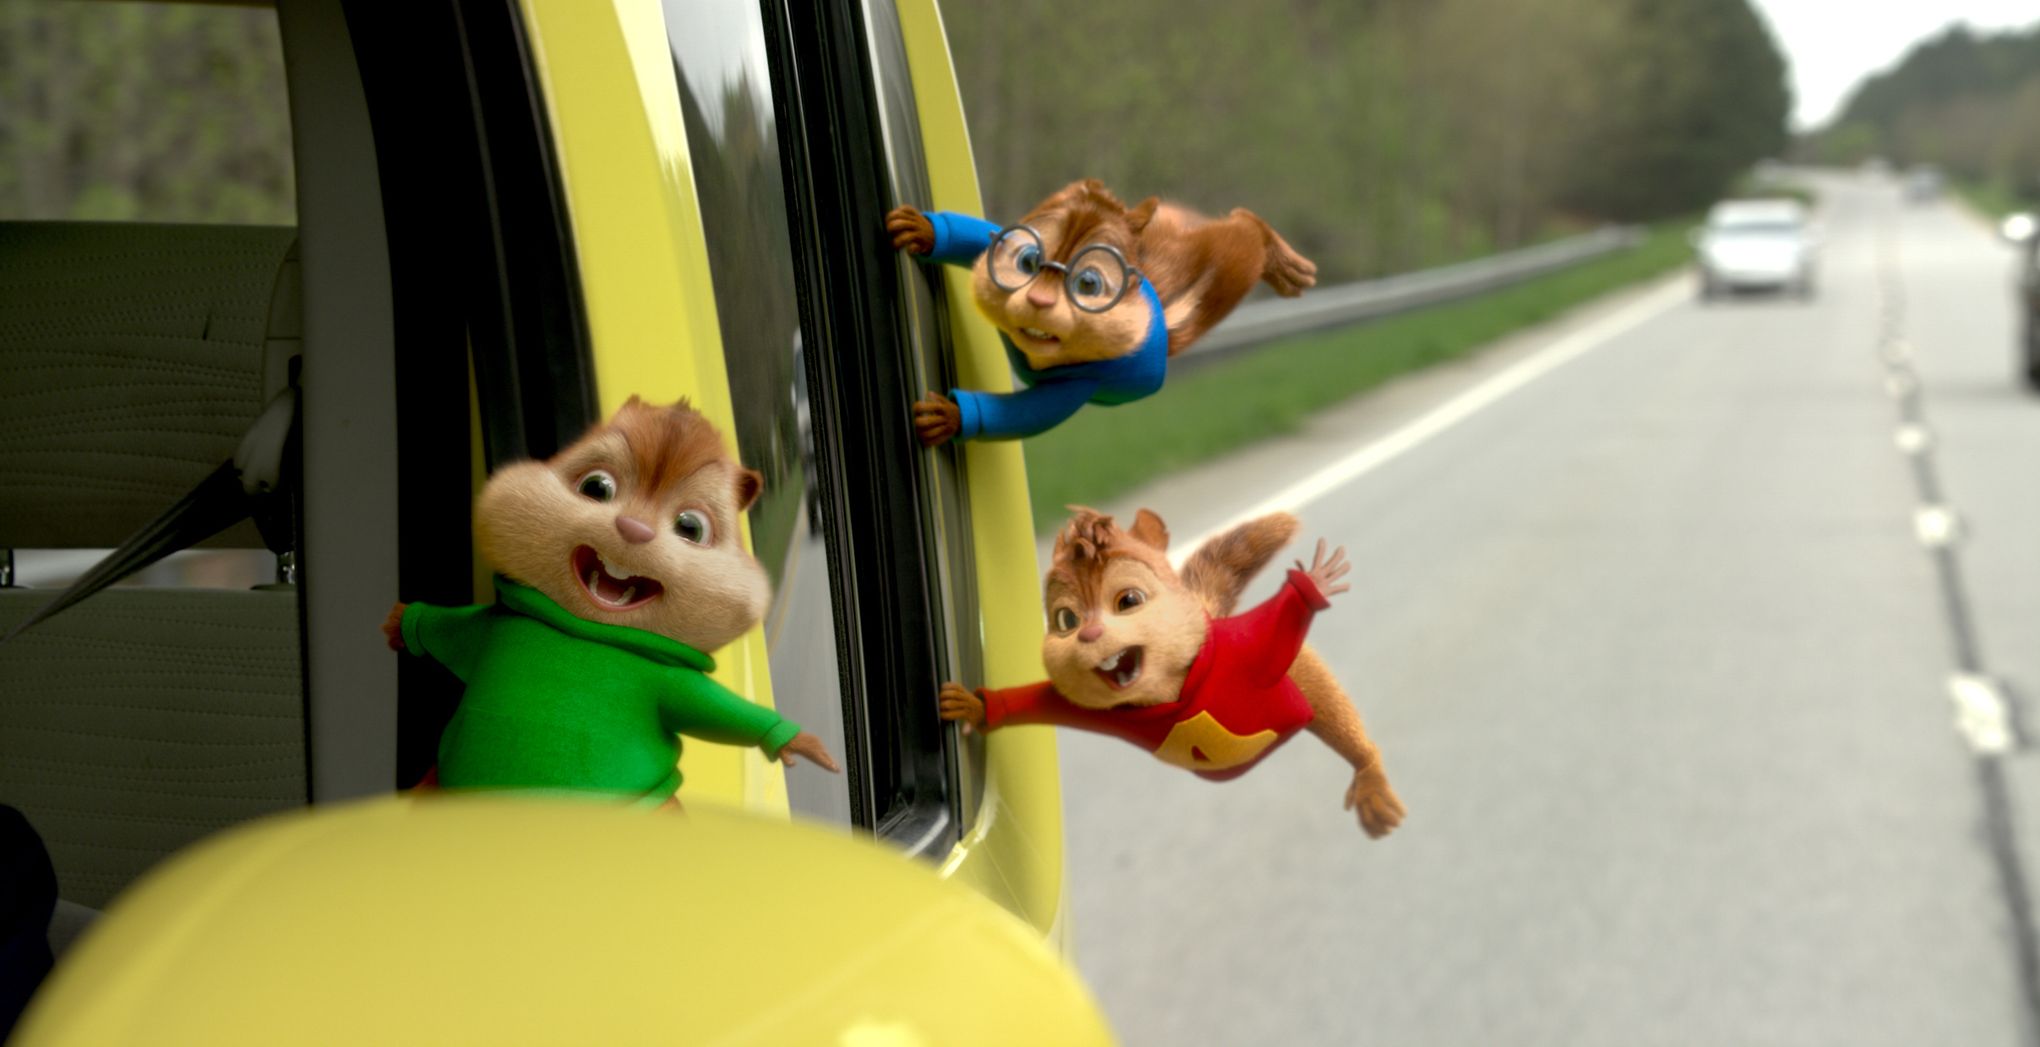 Alvin and the Chipmunks: The Road Chip' may drive you nuts